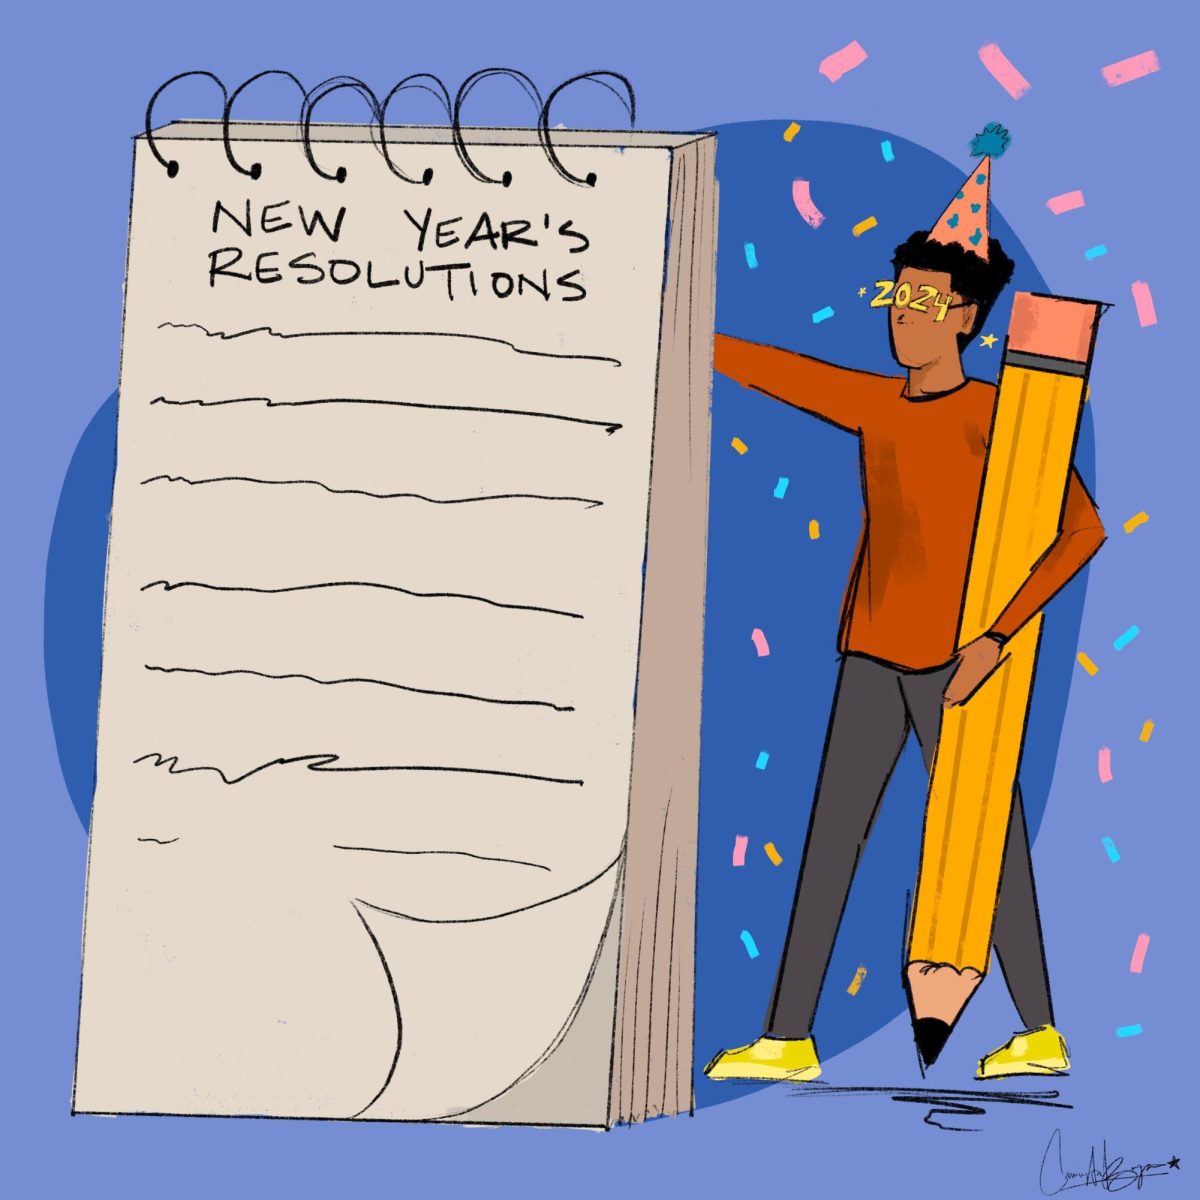 ‘A fresh slate’: Students share their New Year’s resolutions